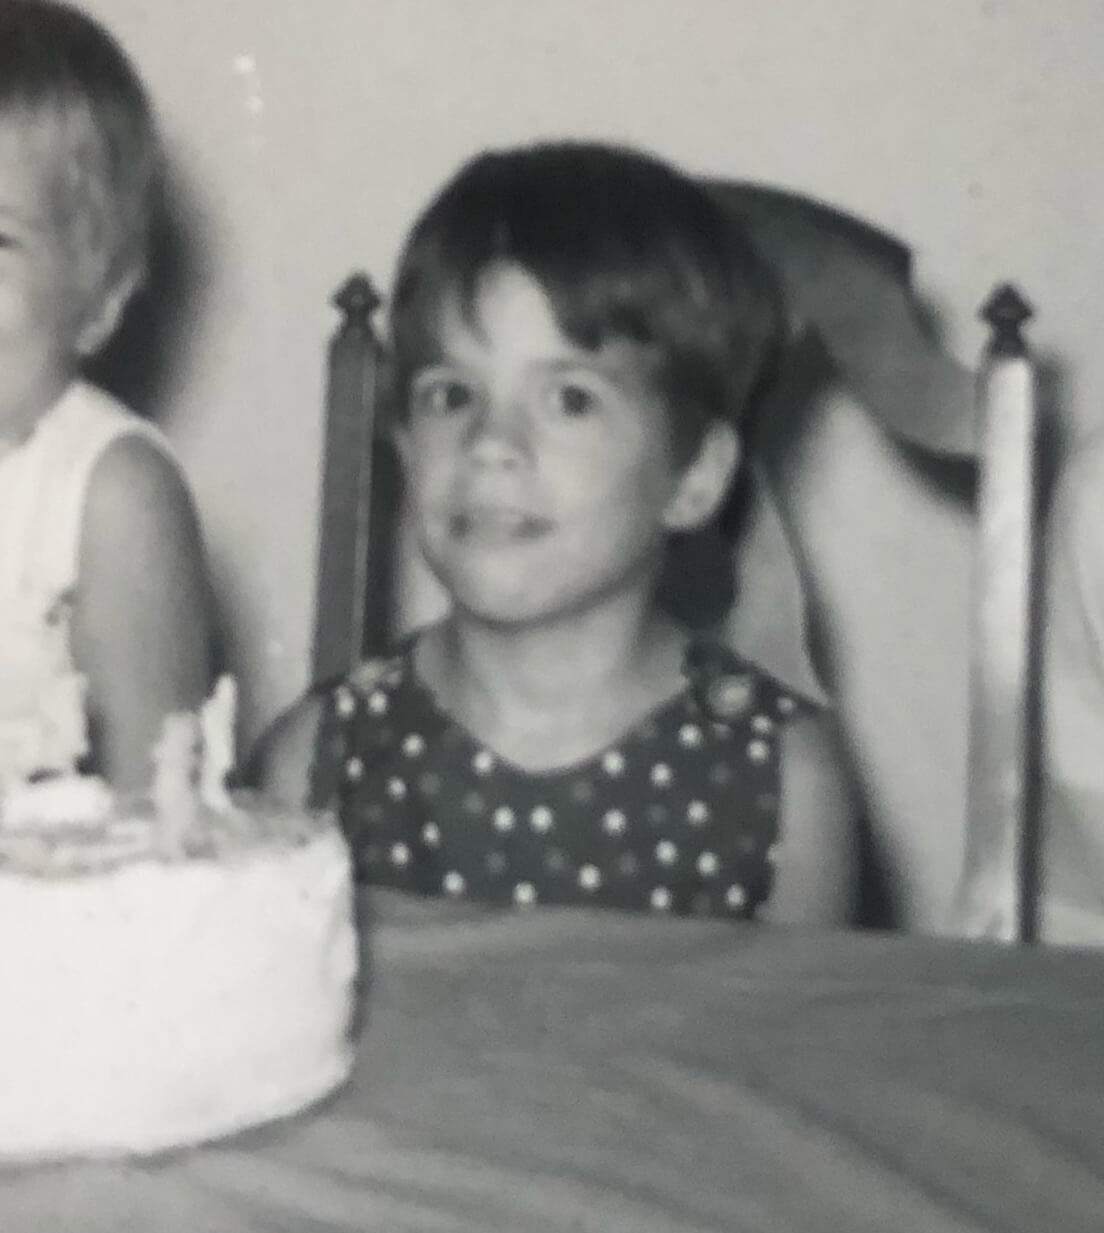 Nancy M. Williams at her sixth birthday sitting at a table with a birthday cake in white frosting.